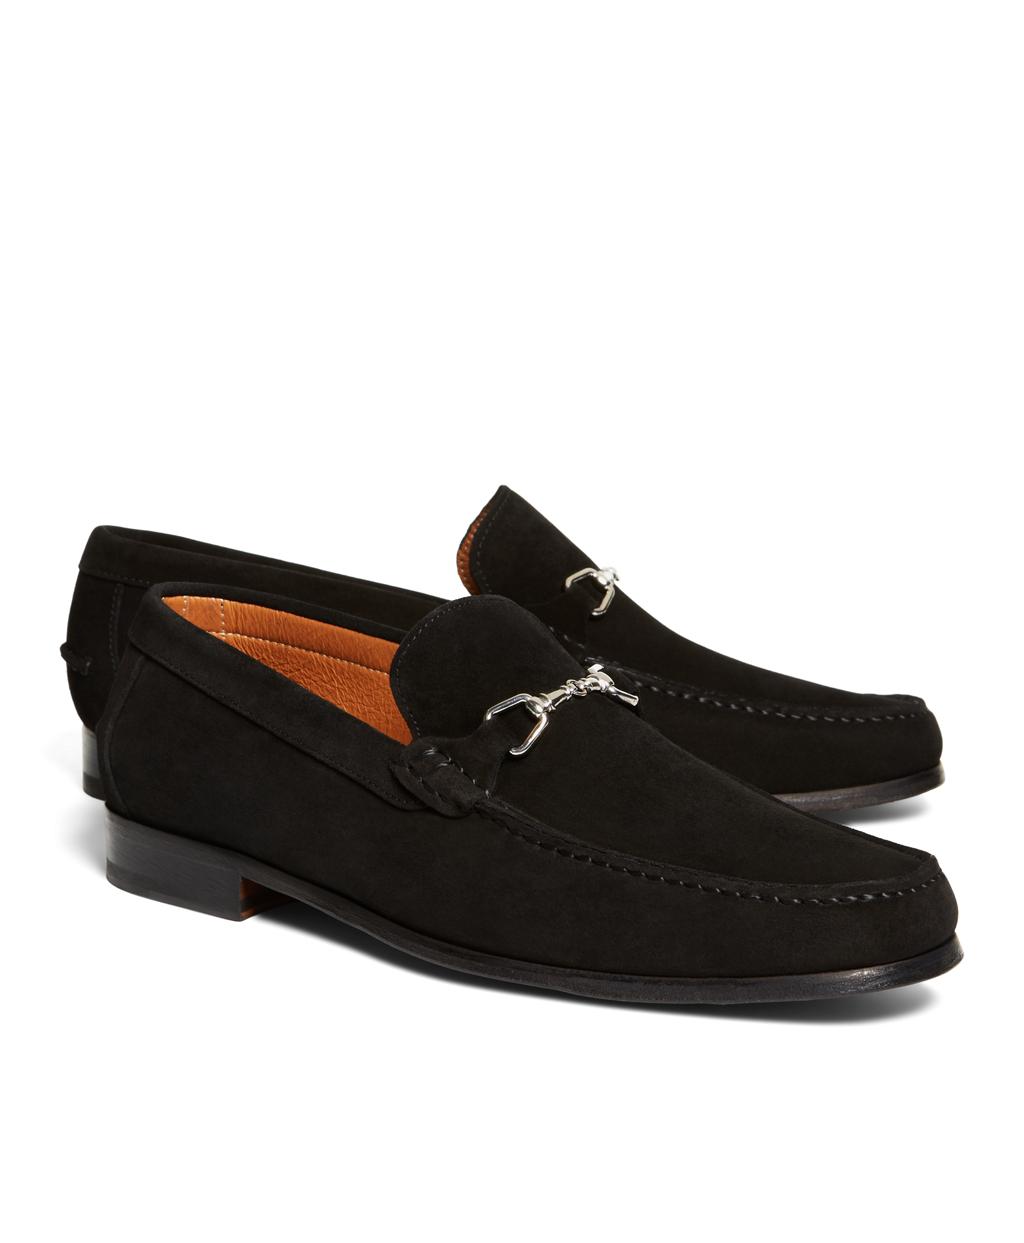 Lyst - Brooks Brothers Suede Buckle Loafers in Black for Men